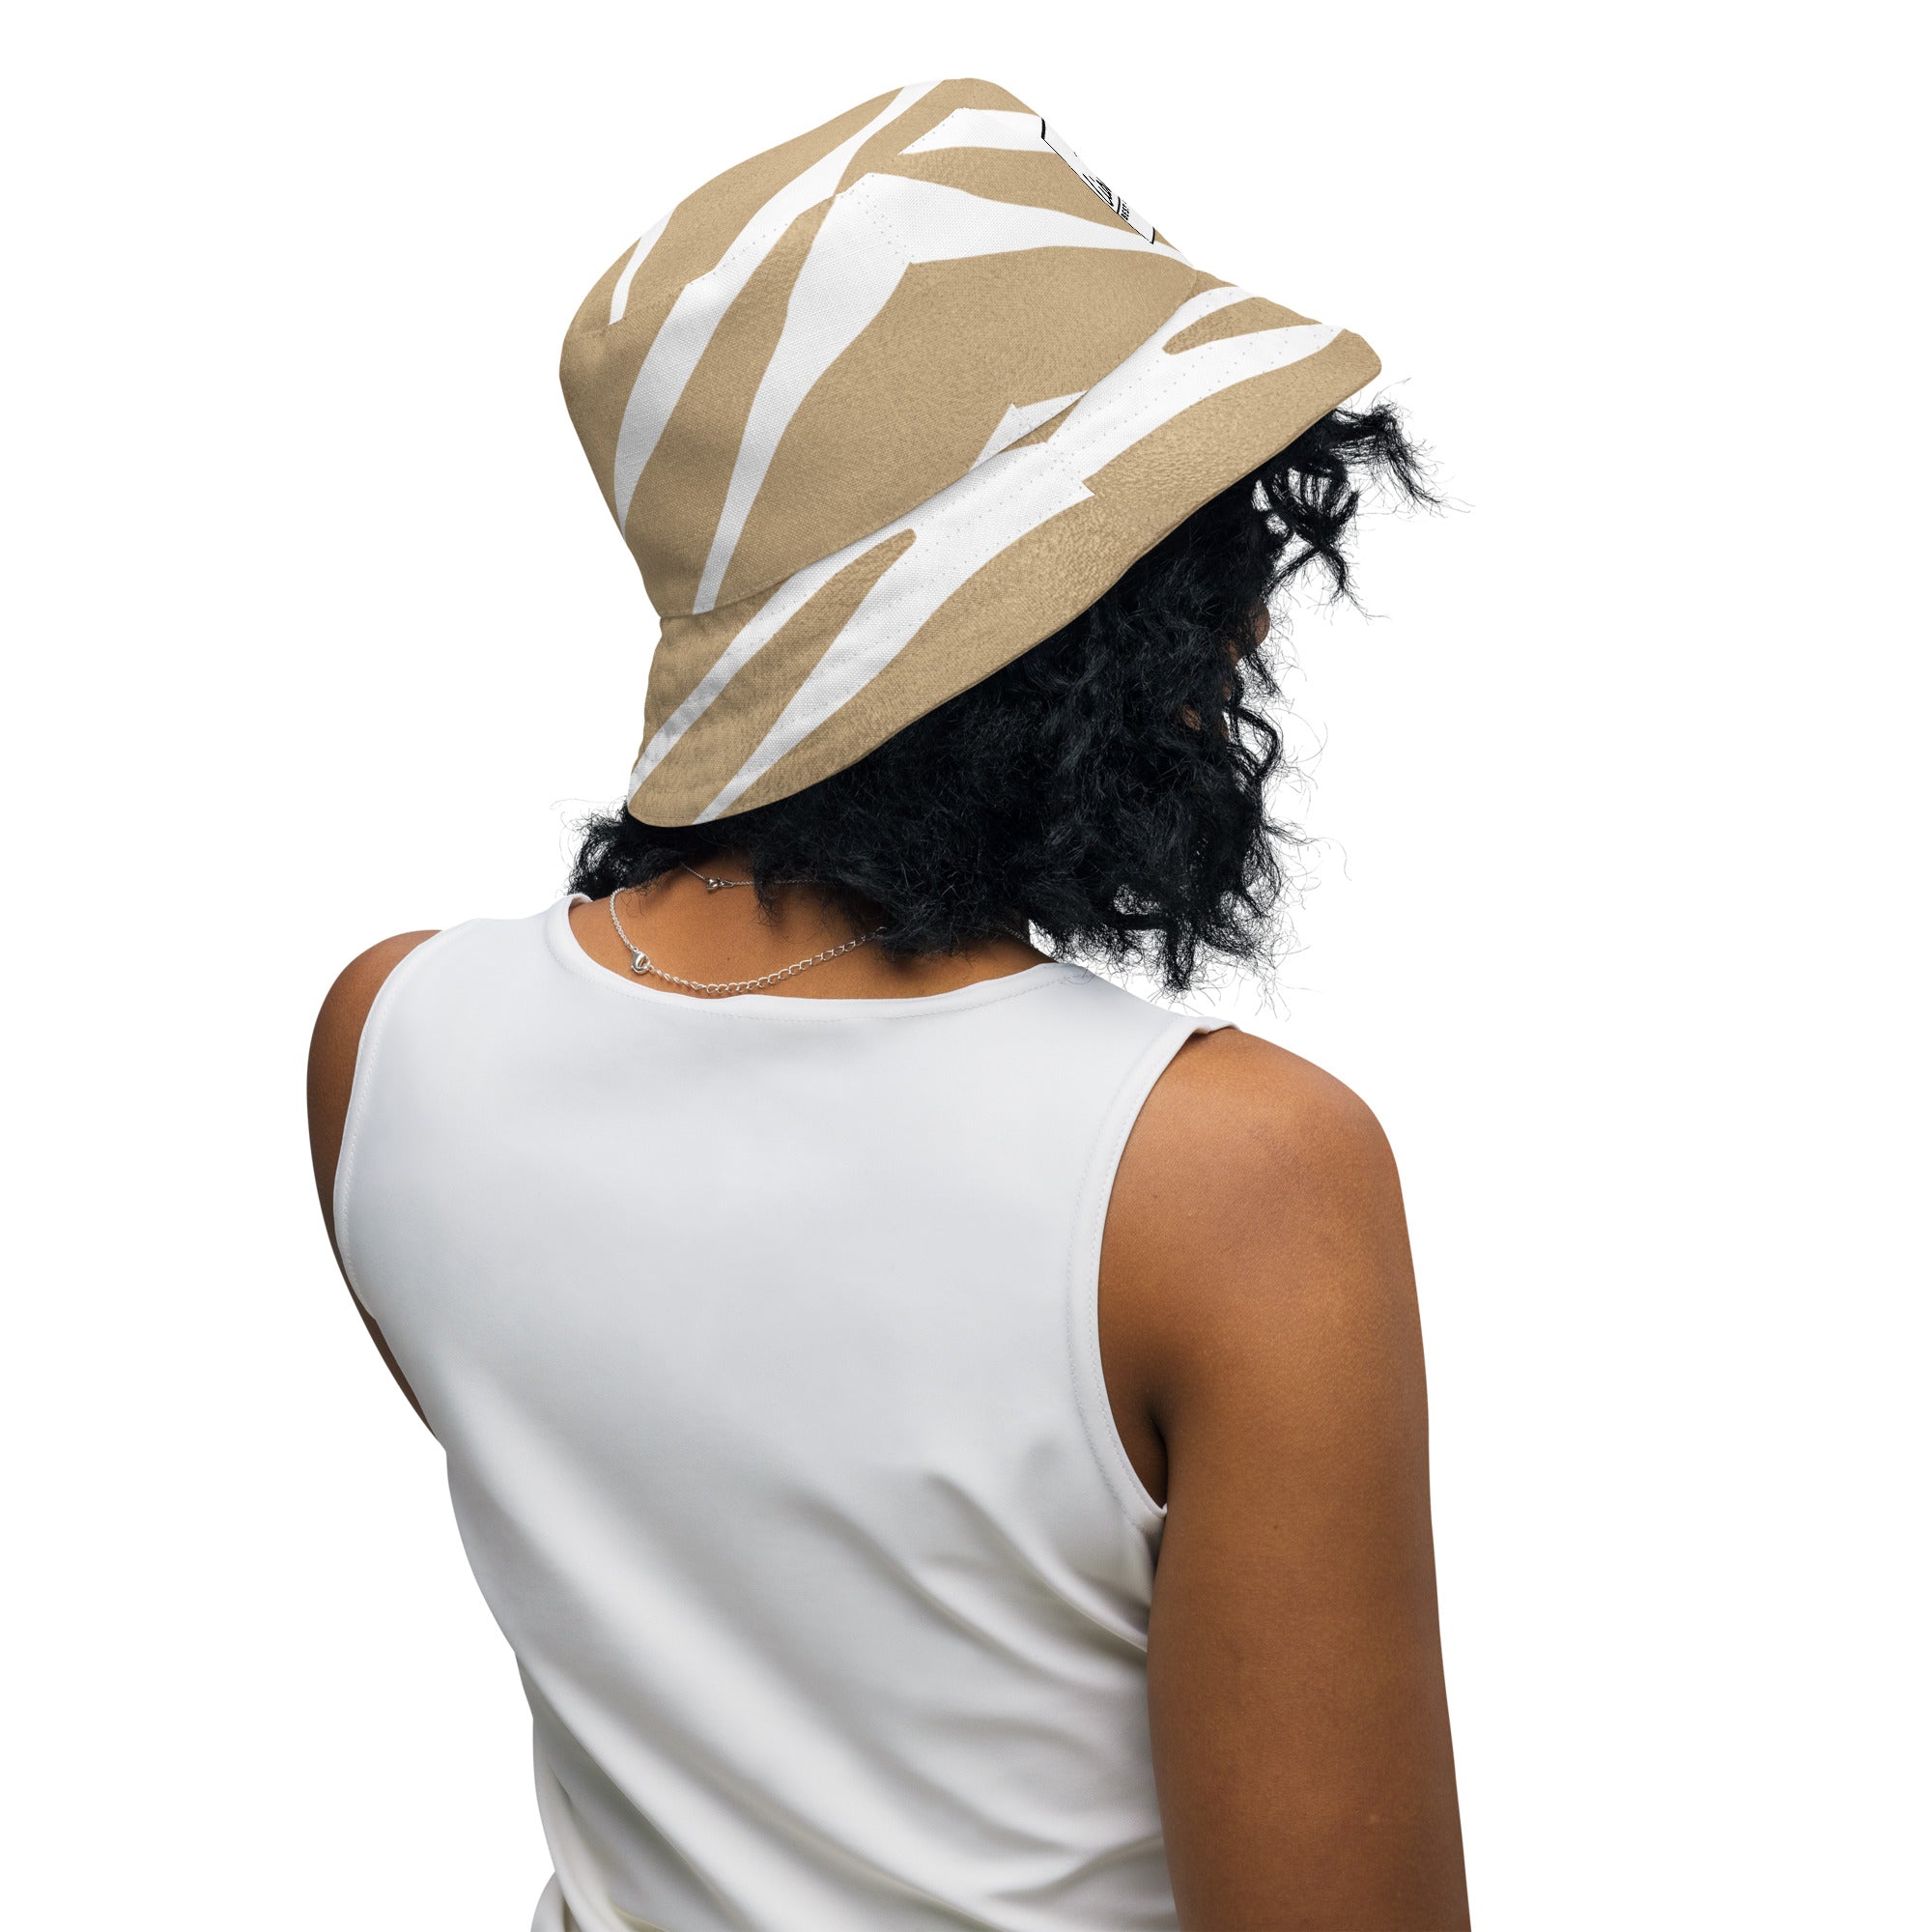 "Glamorous Wilderness: Gold and White Animal Print Bucket Hat, lioness-love